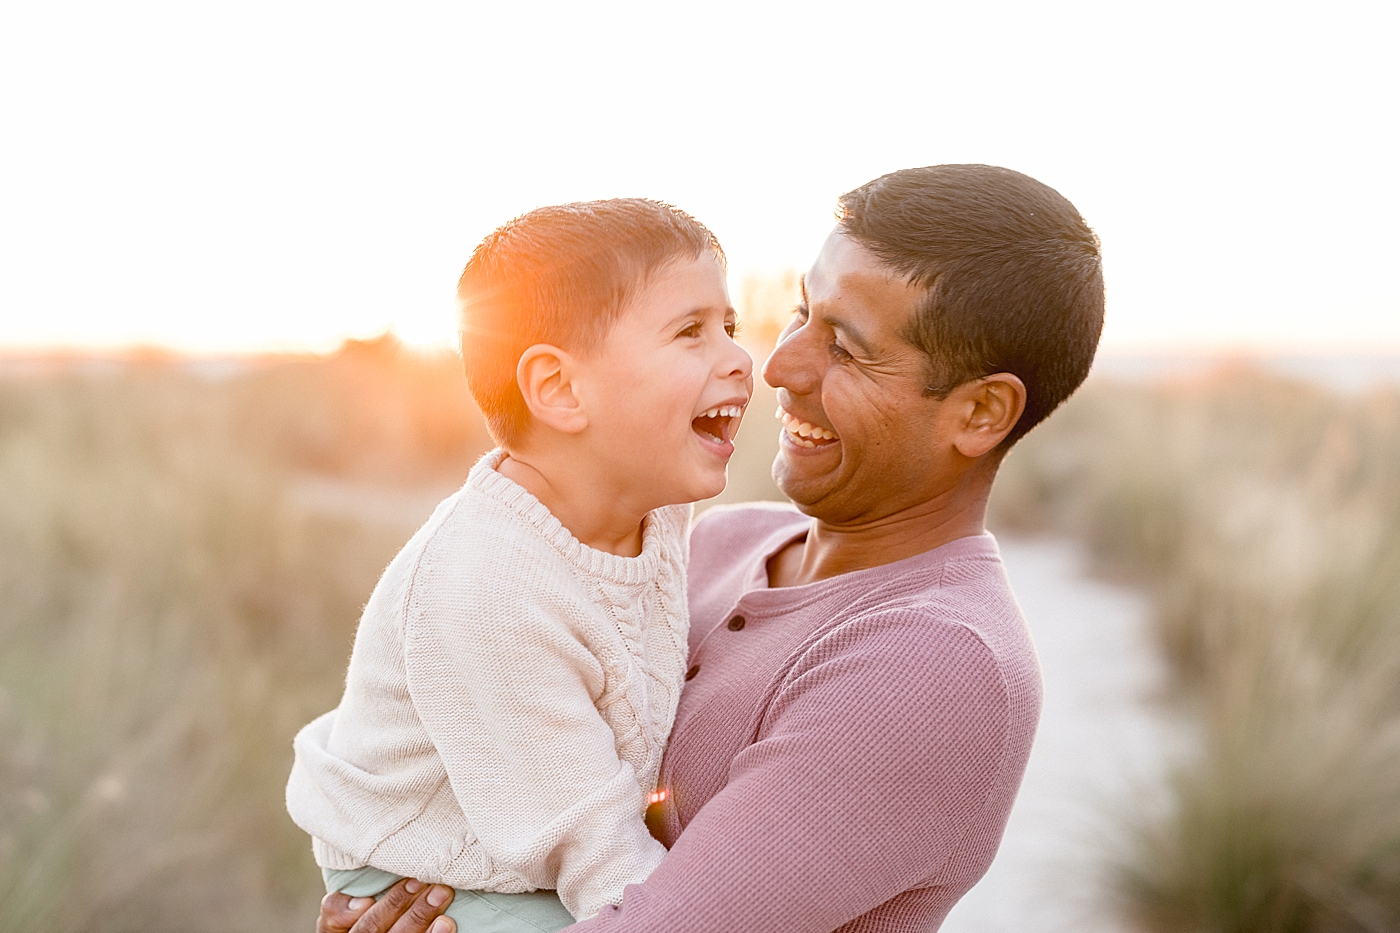 Father-son photo on the beach at sunset. Photos by Brittany Elise Photography.